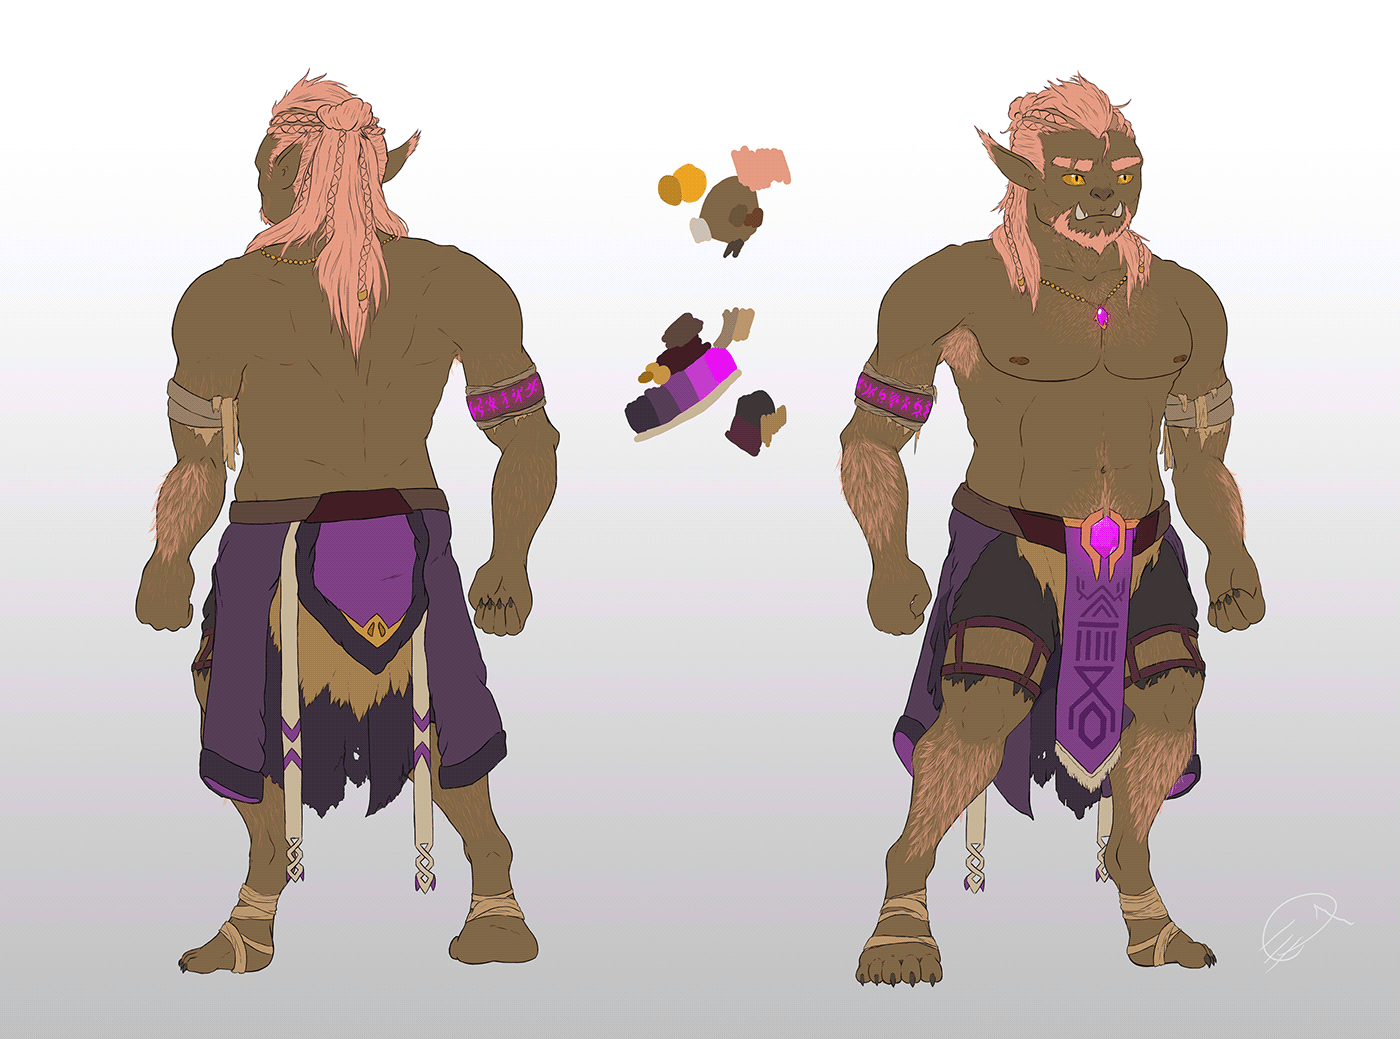 bugbear character_design dnd Dungeons and Dragons ILLUSTRATION  warlock